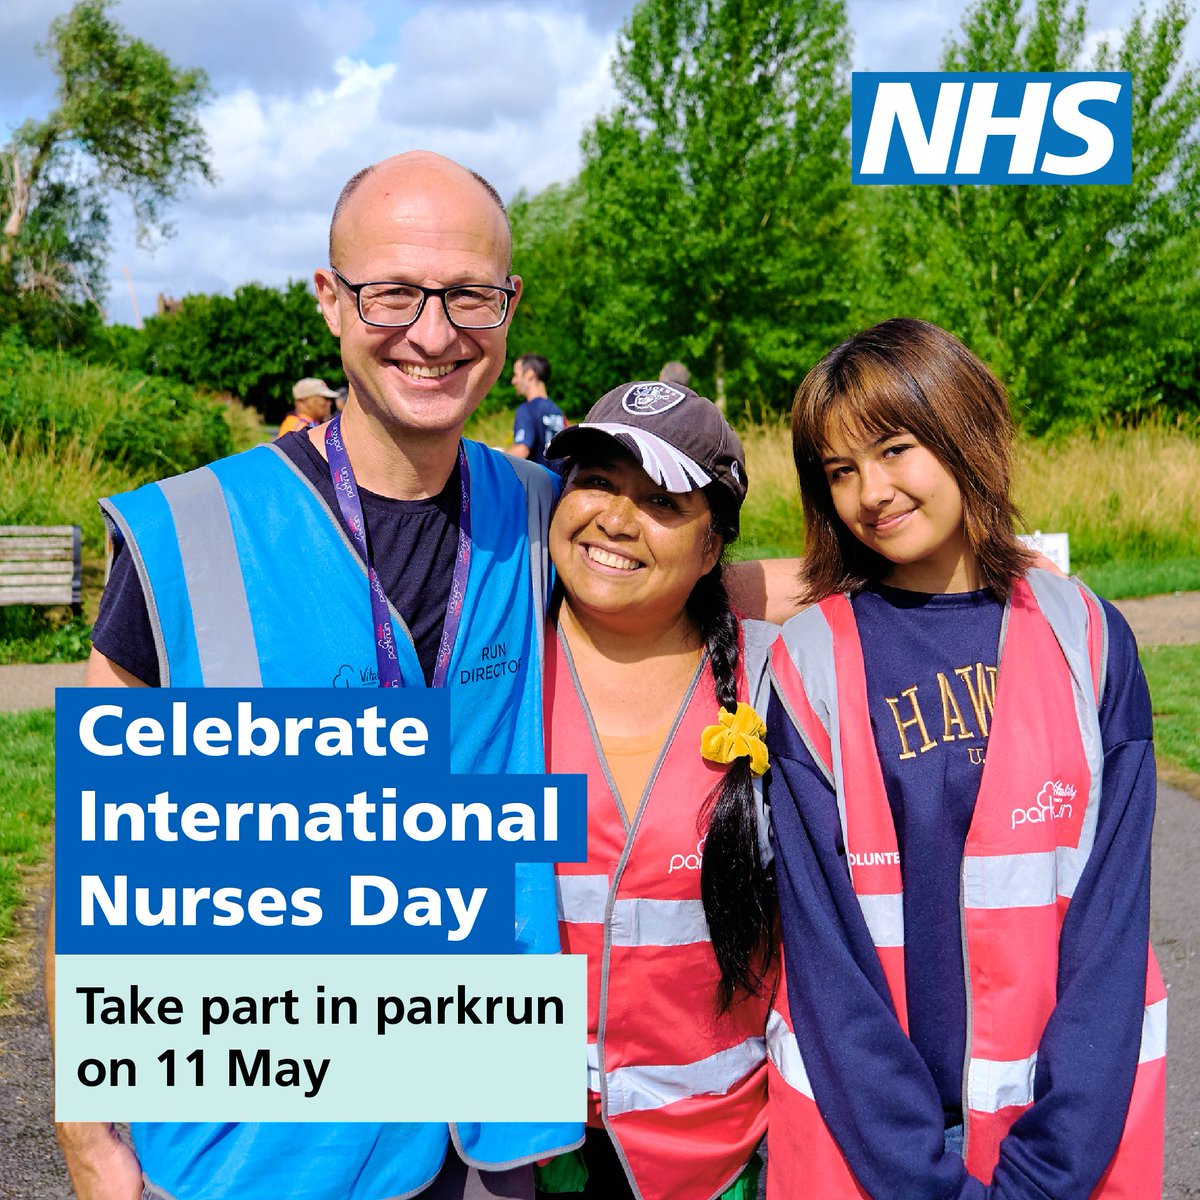 We hope everyone involved in parkrun today to mark International Nurses Day has a brilliant time 🙌 Well done and thank you for supporting #IND2024